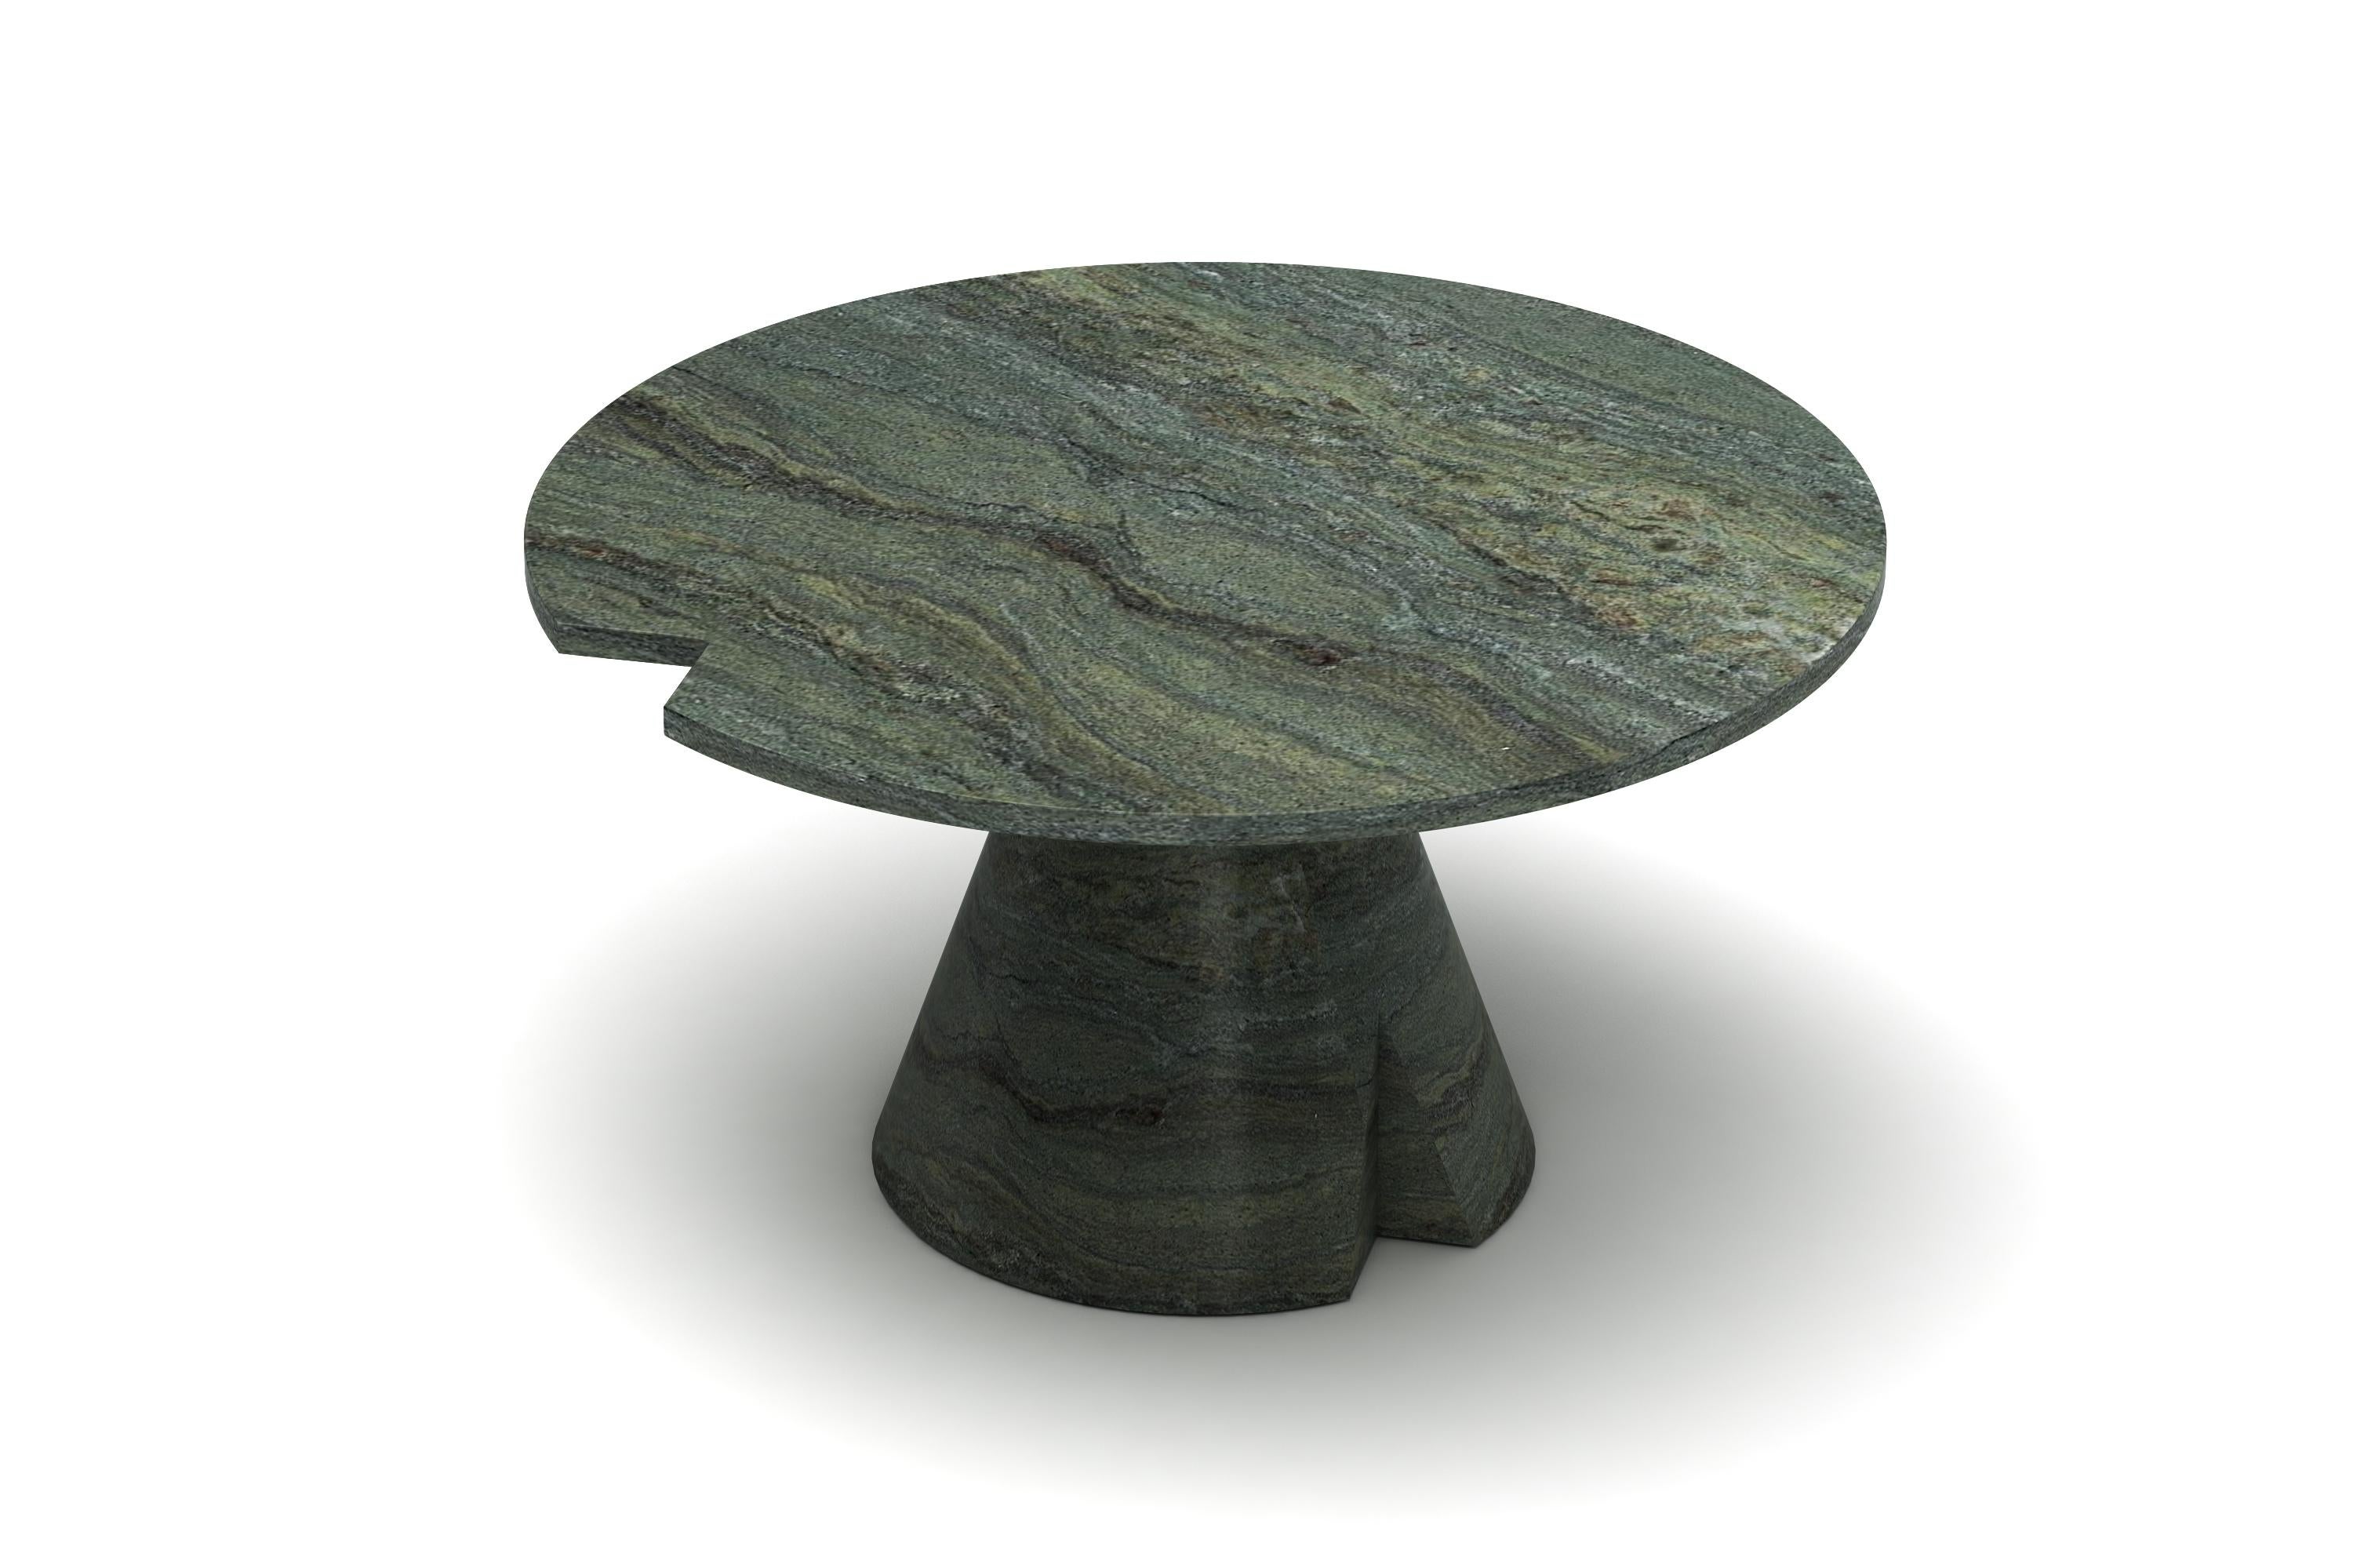 Fashionable Oresteia W Table in Greek Marble In Excellent Condition For Sale In Chania, GR